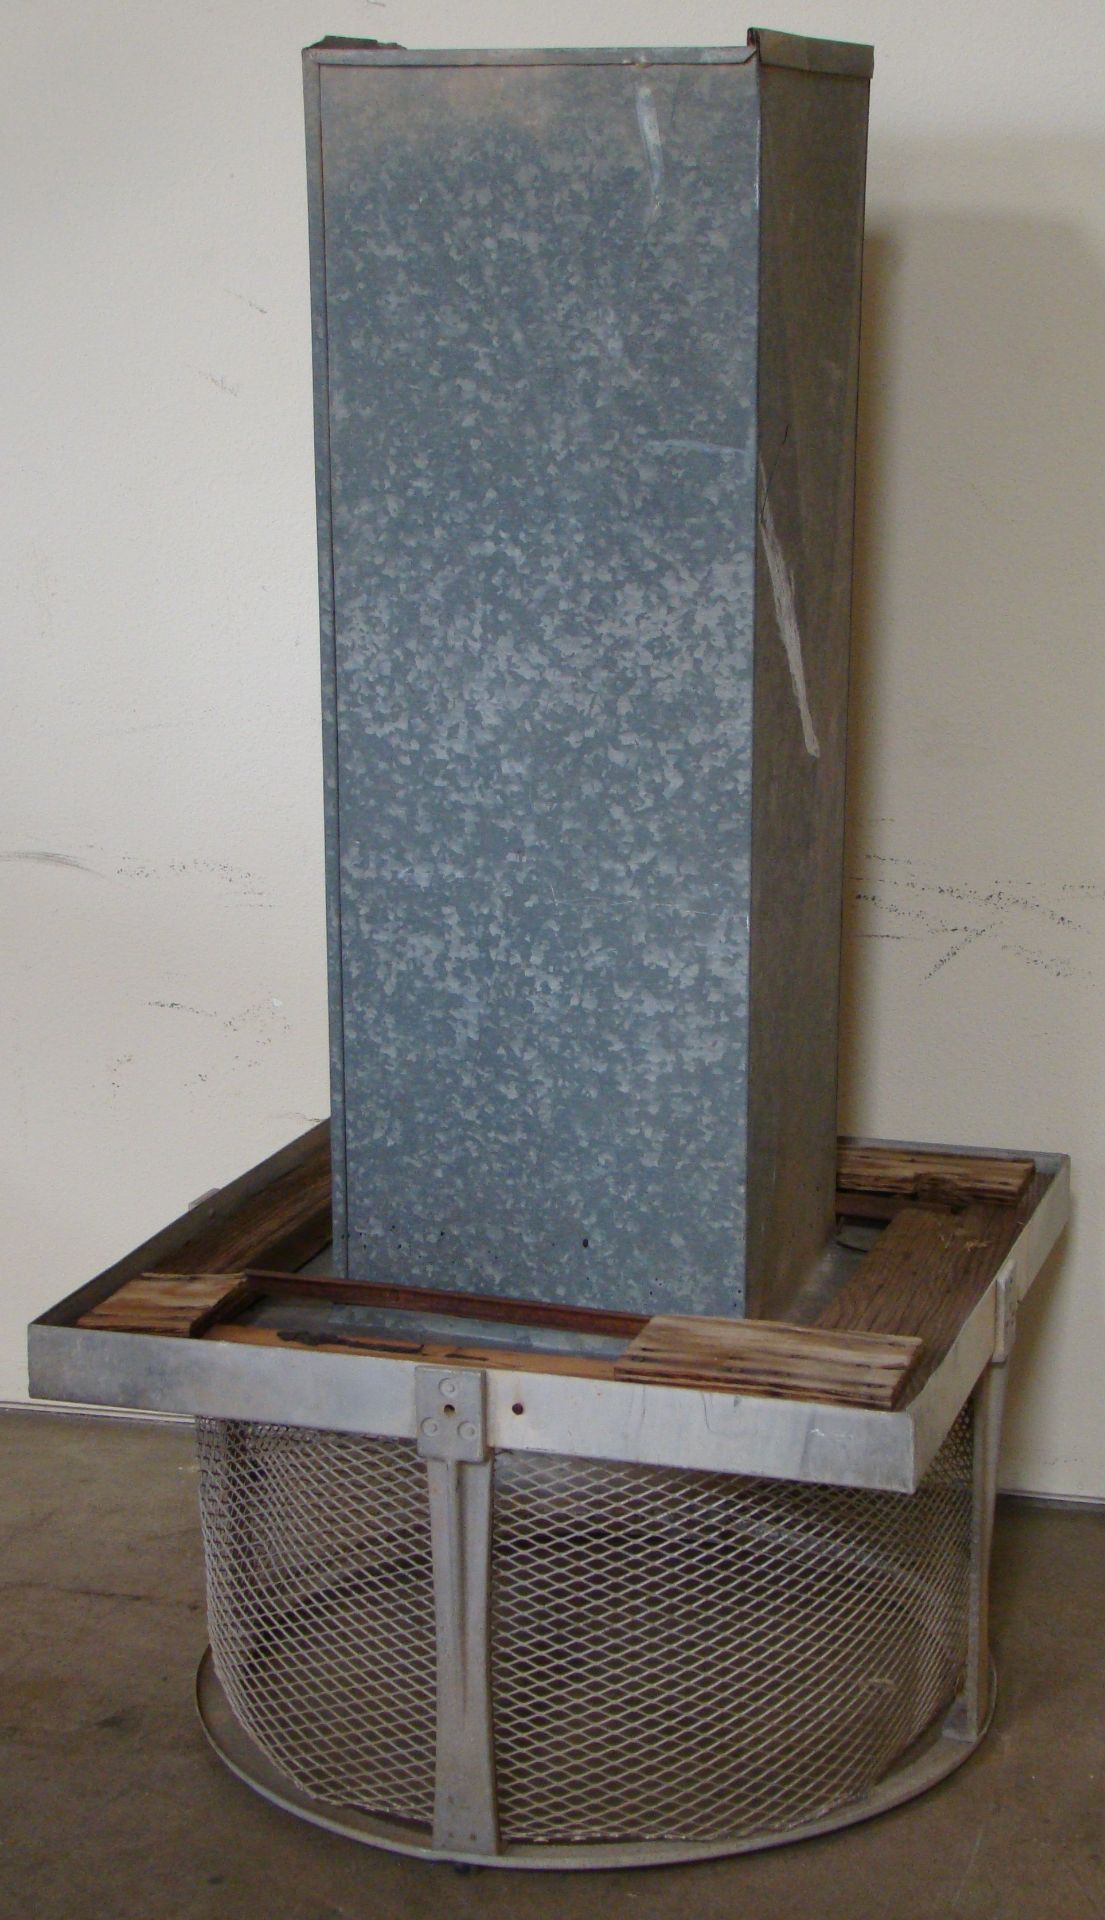 Chimney Stack / Exhaust Air Vent Pipe, 30" round & 59" tall - Image 2 of 2